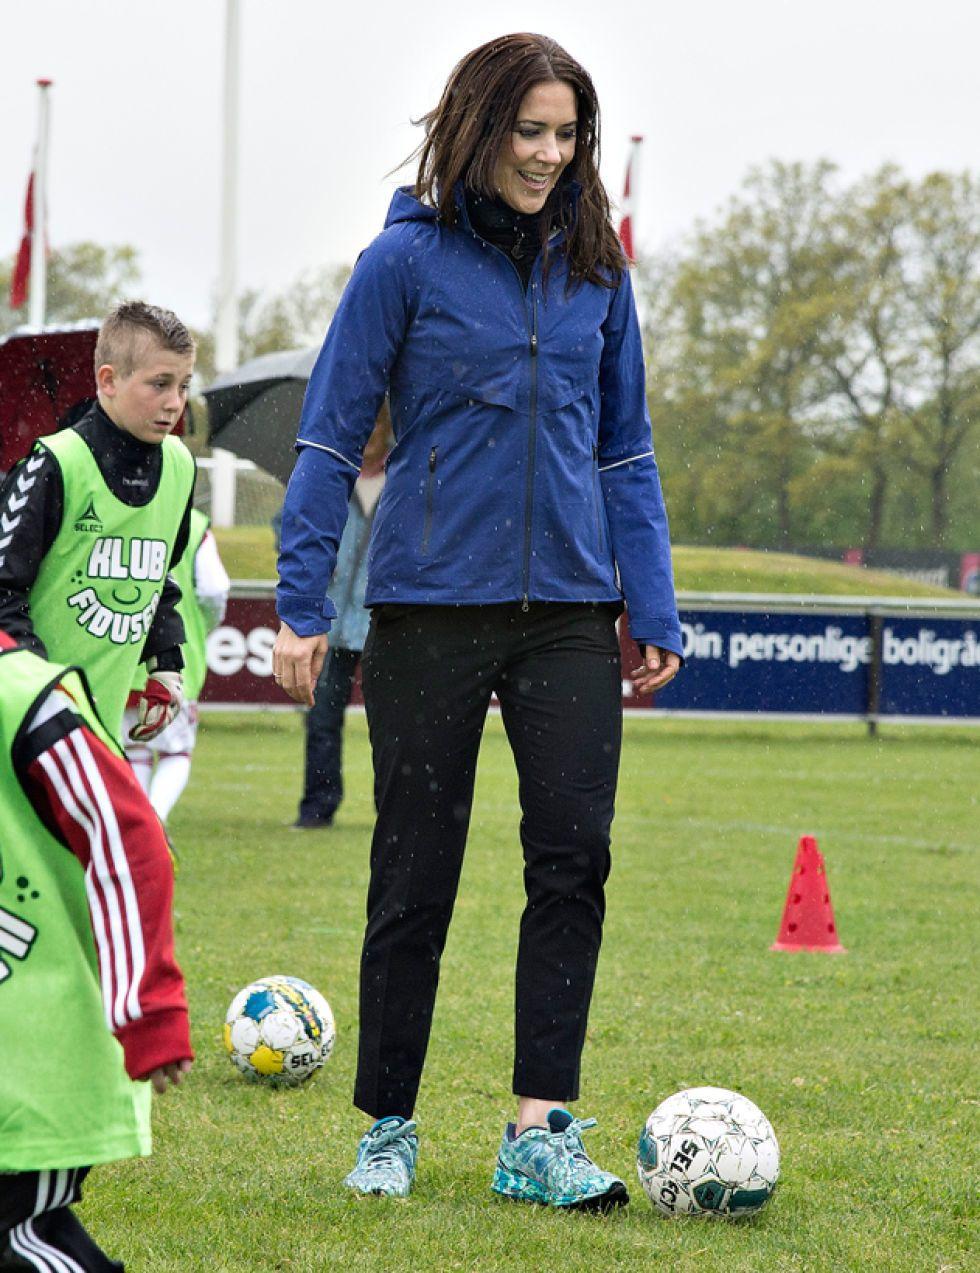 Princess Mary of Denmark turns to soccer and demonstrates her ability with the ball